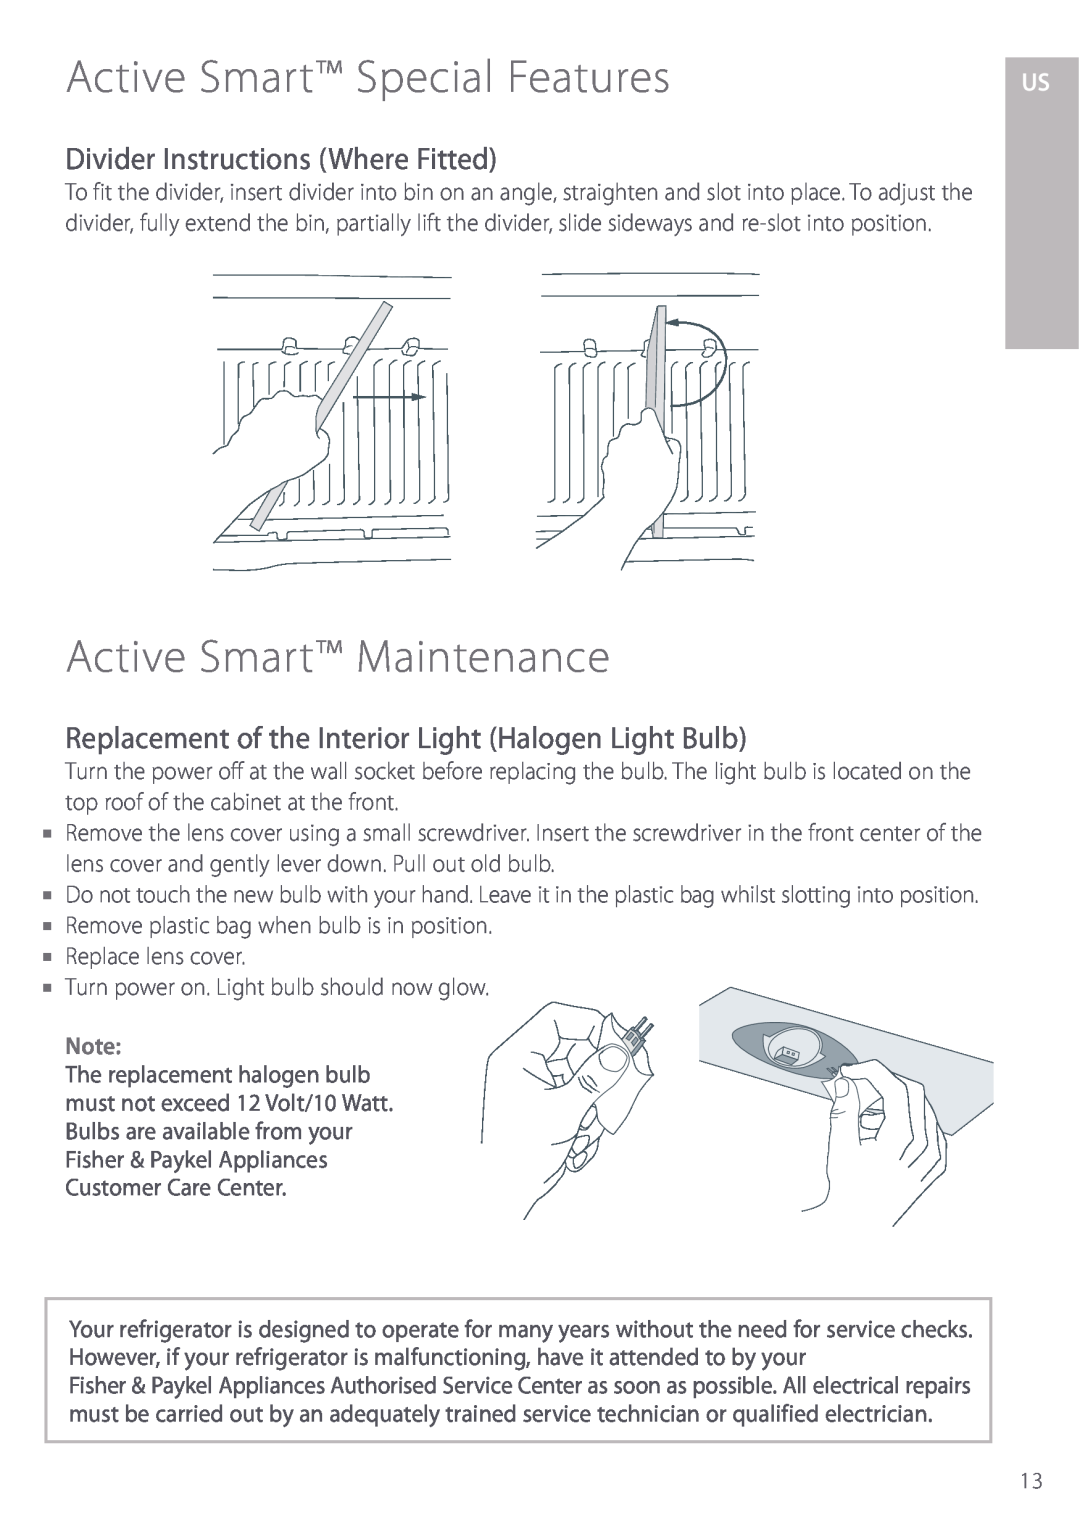 Fisher & Paykel manual Active Smart Maintenance, Divider Instructions Where Fitted, Active Smart Special Features 